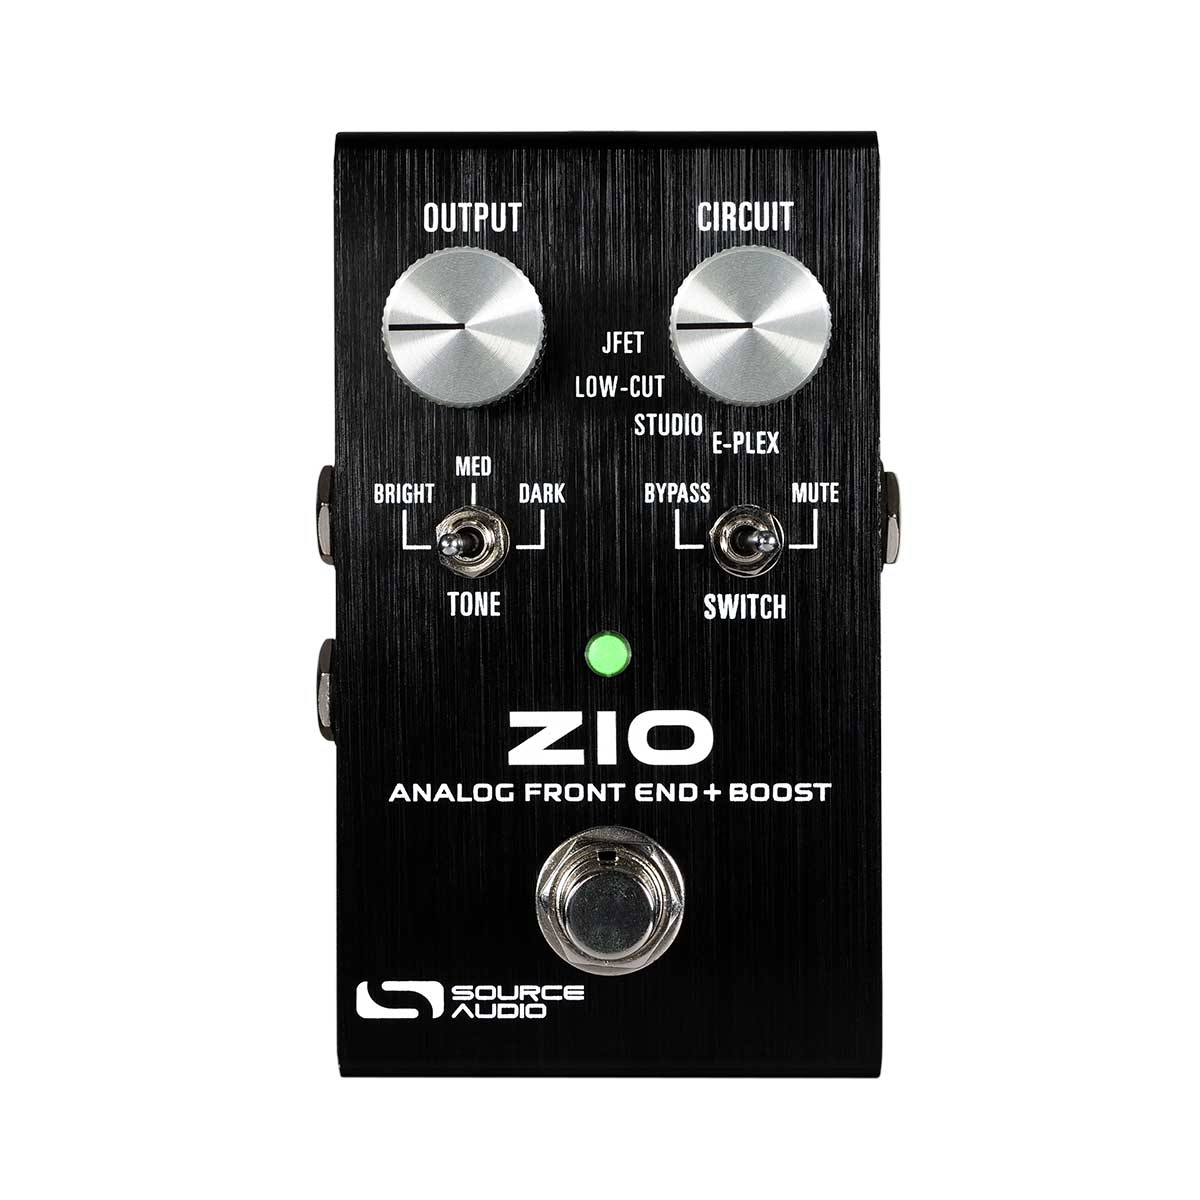 Source Audio ZIO Analog Front End + Boost pedal